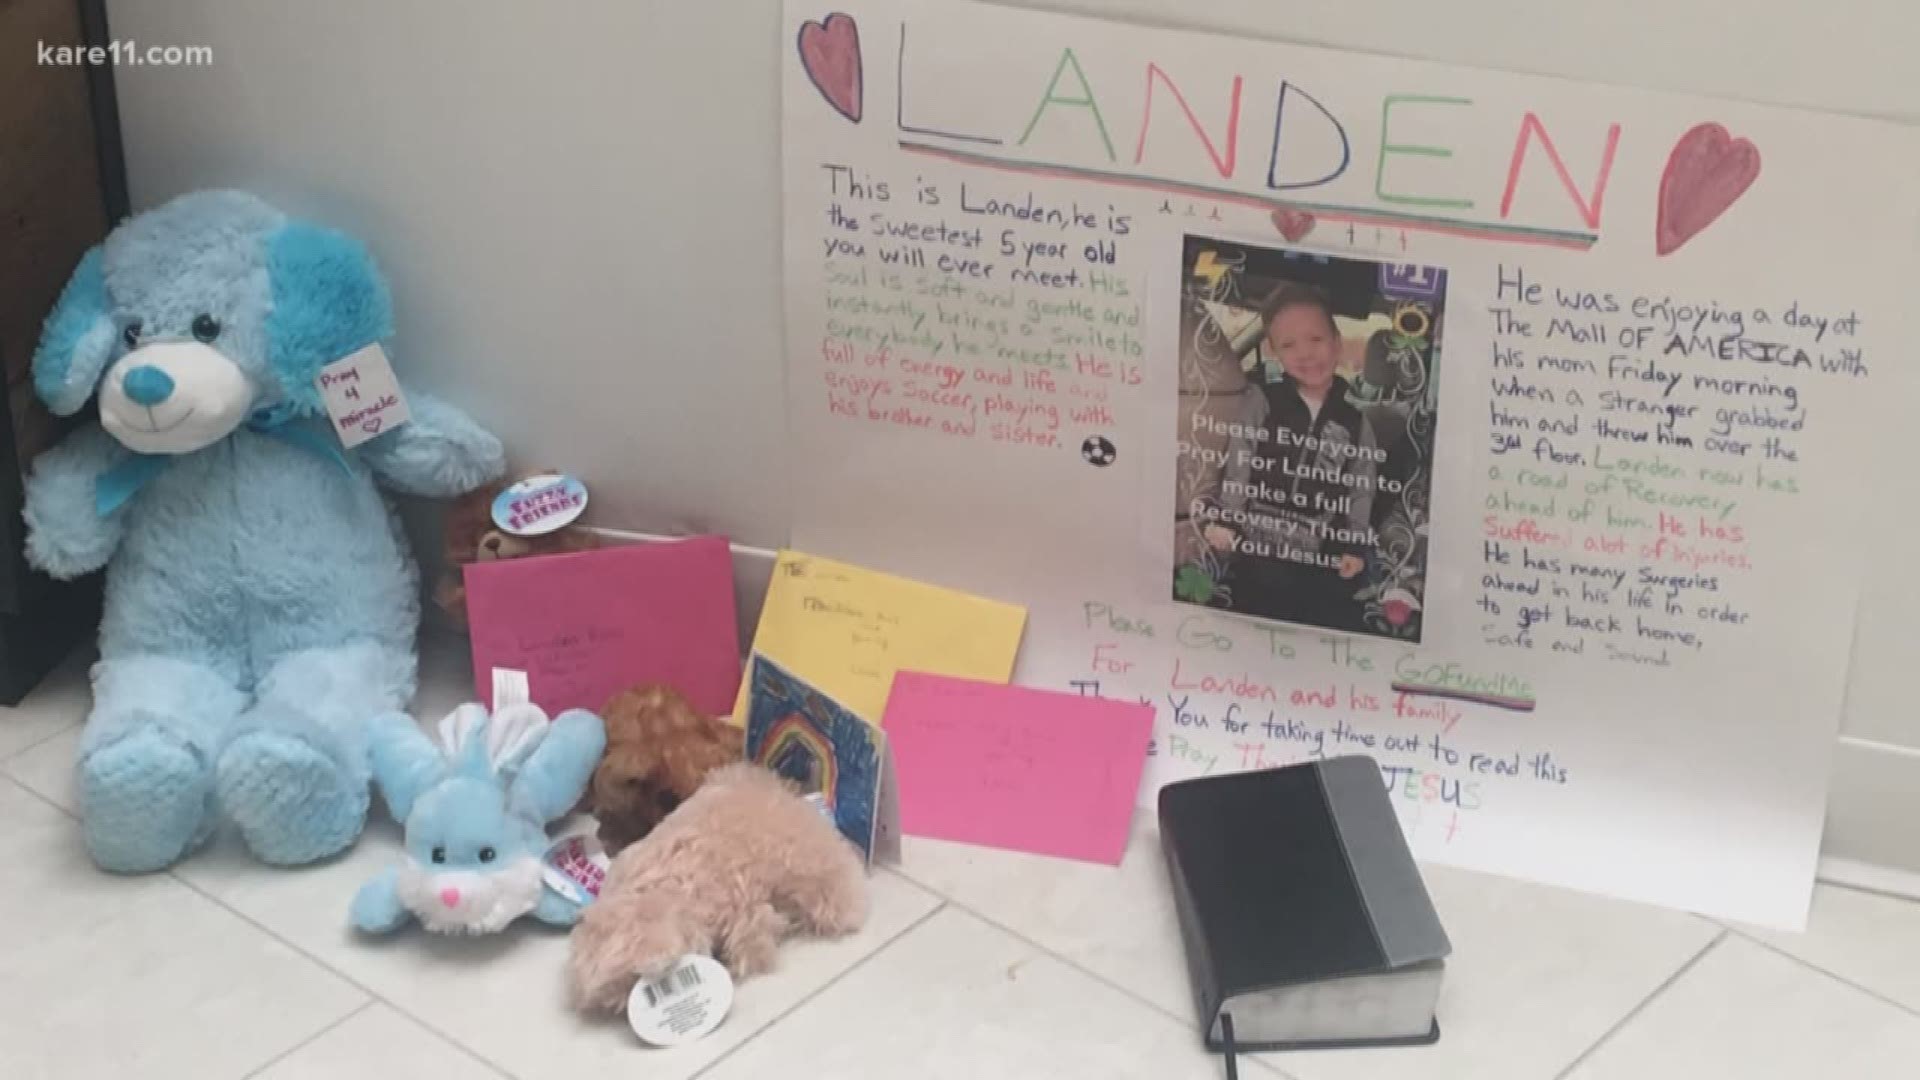 It's been a long 5 months of recovery for the little boy thrown by a stranger from the 3rd floor MOA balcony, but his family announced Tuesday that Landen is finally out of the hospital and home with his family.